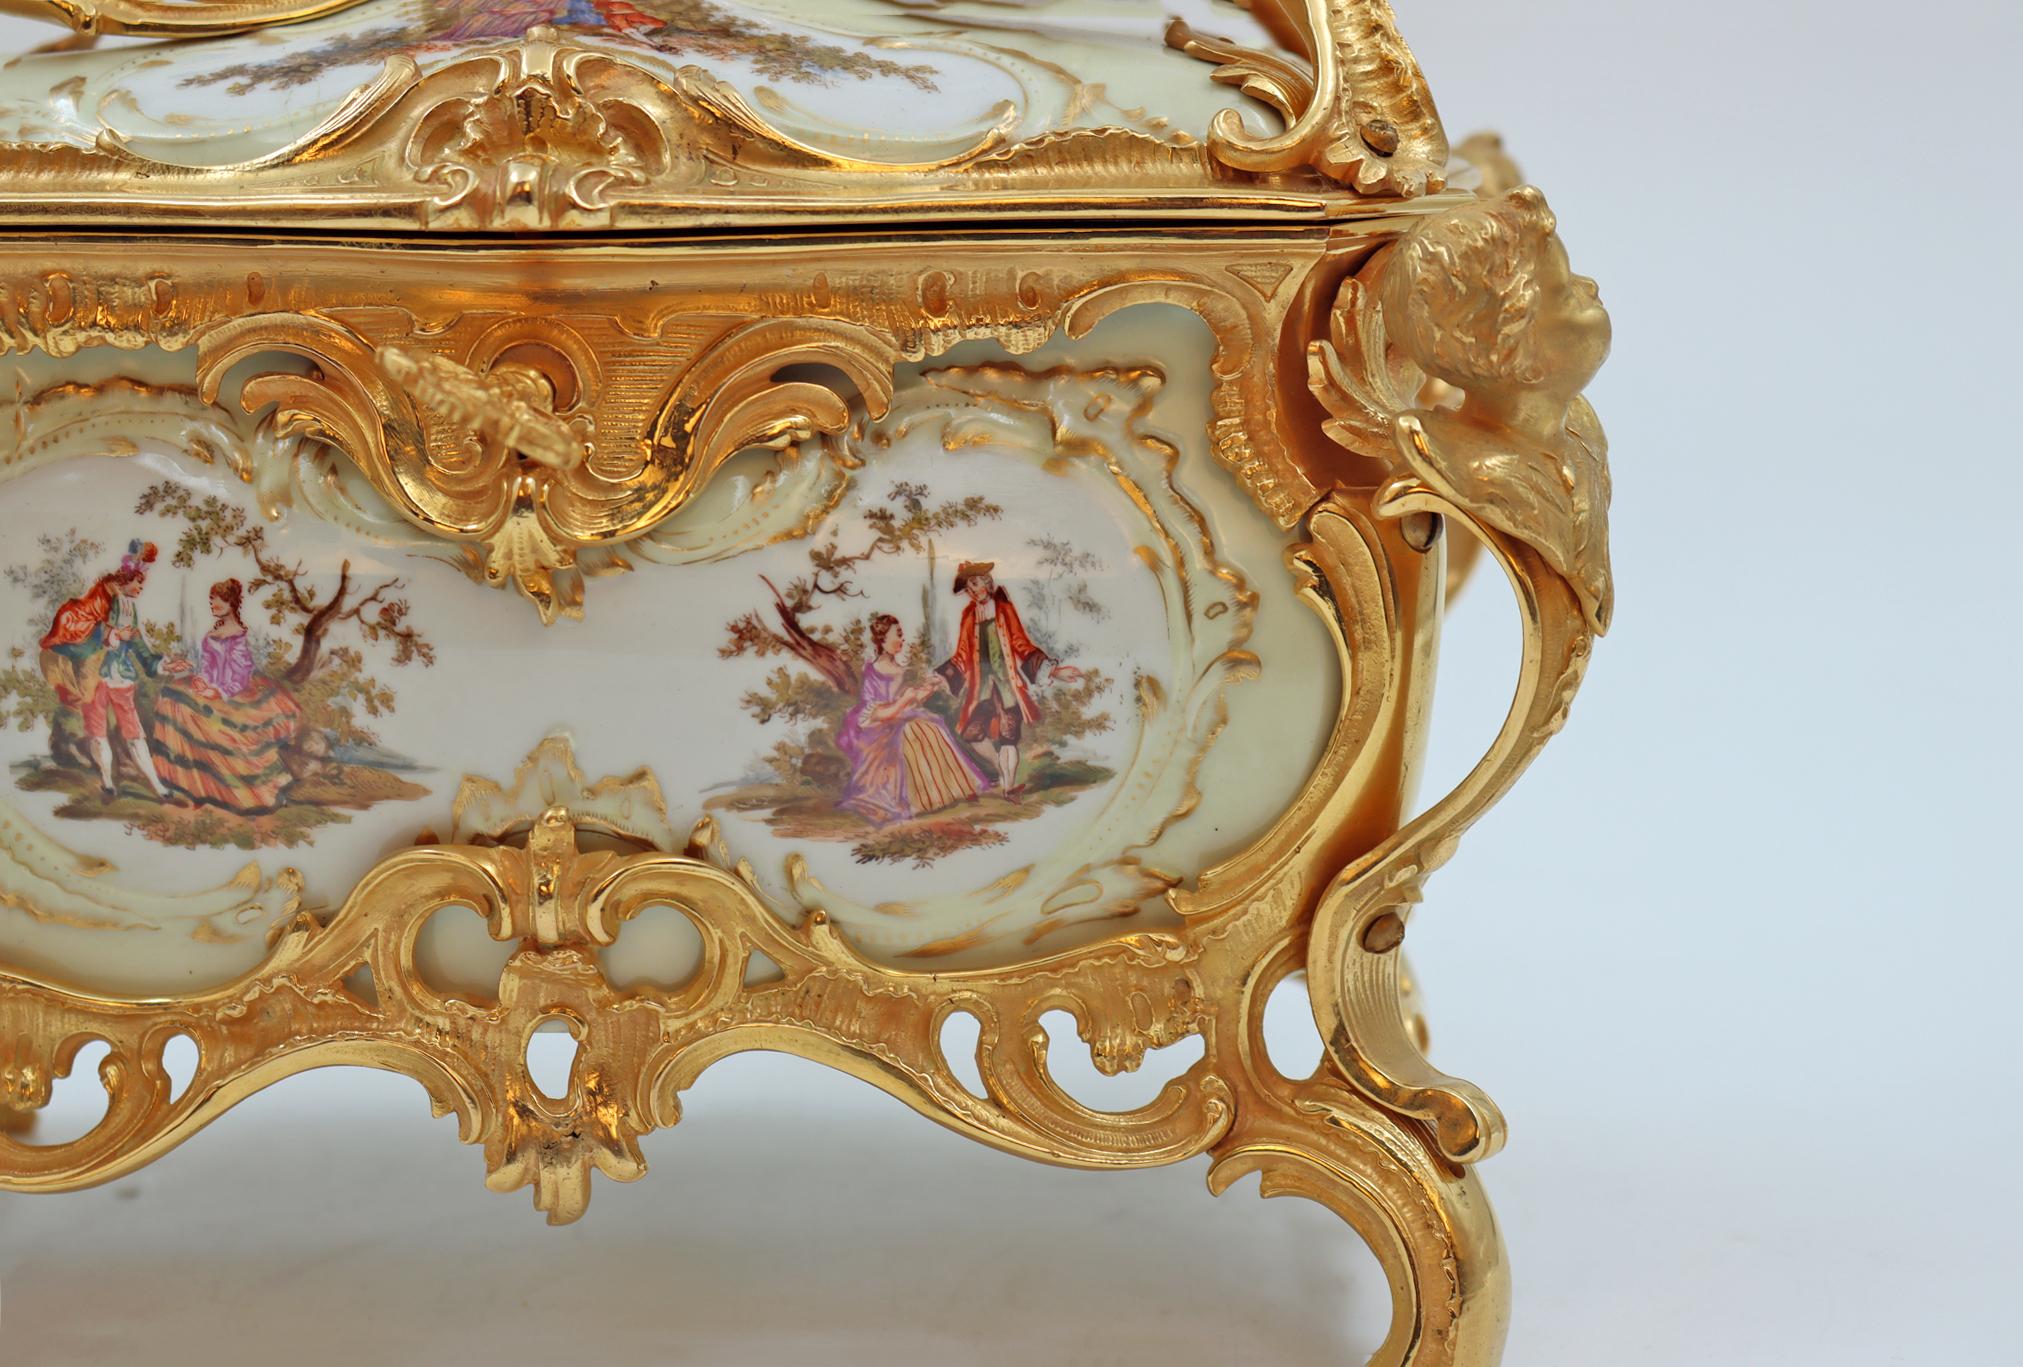 Carriage-shaped box in painted and gilt porcelain, gilt and chased bronze, large decoration, 19th century, Napoleon III period. 
Measures: H: 26 cm, W: 27 cm, D: 19 cm.